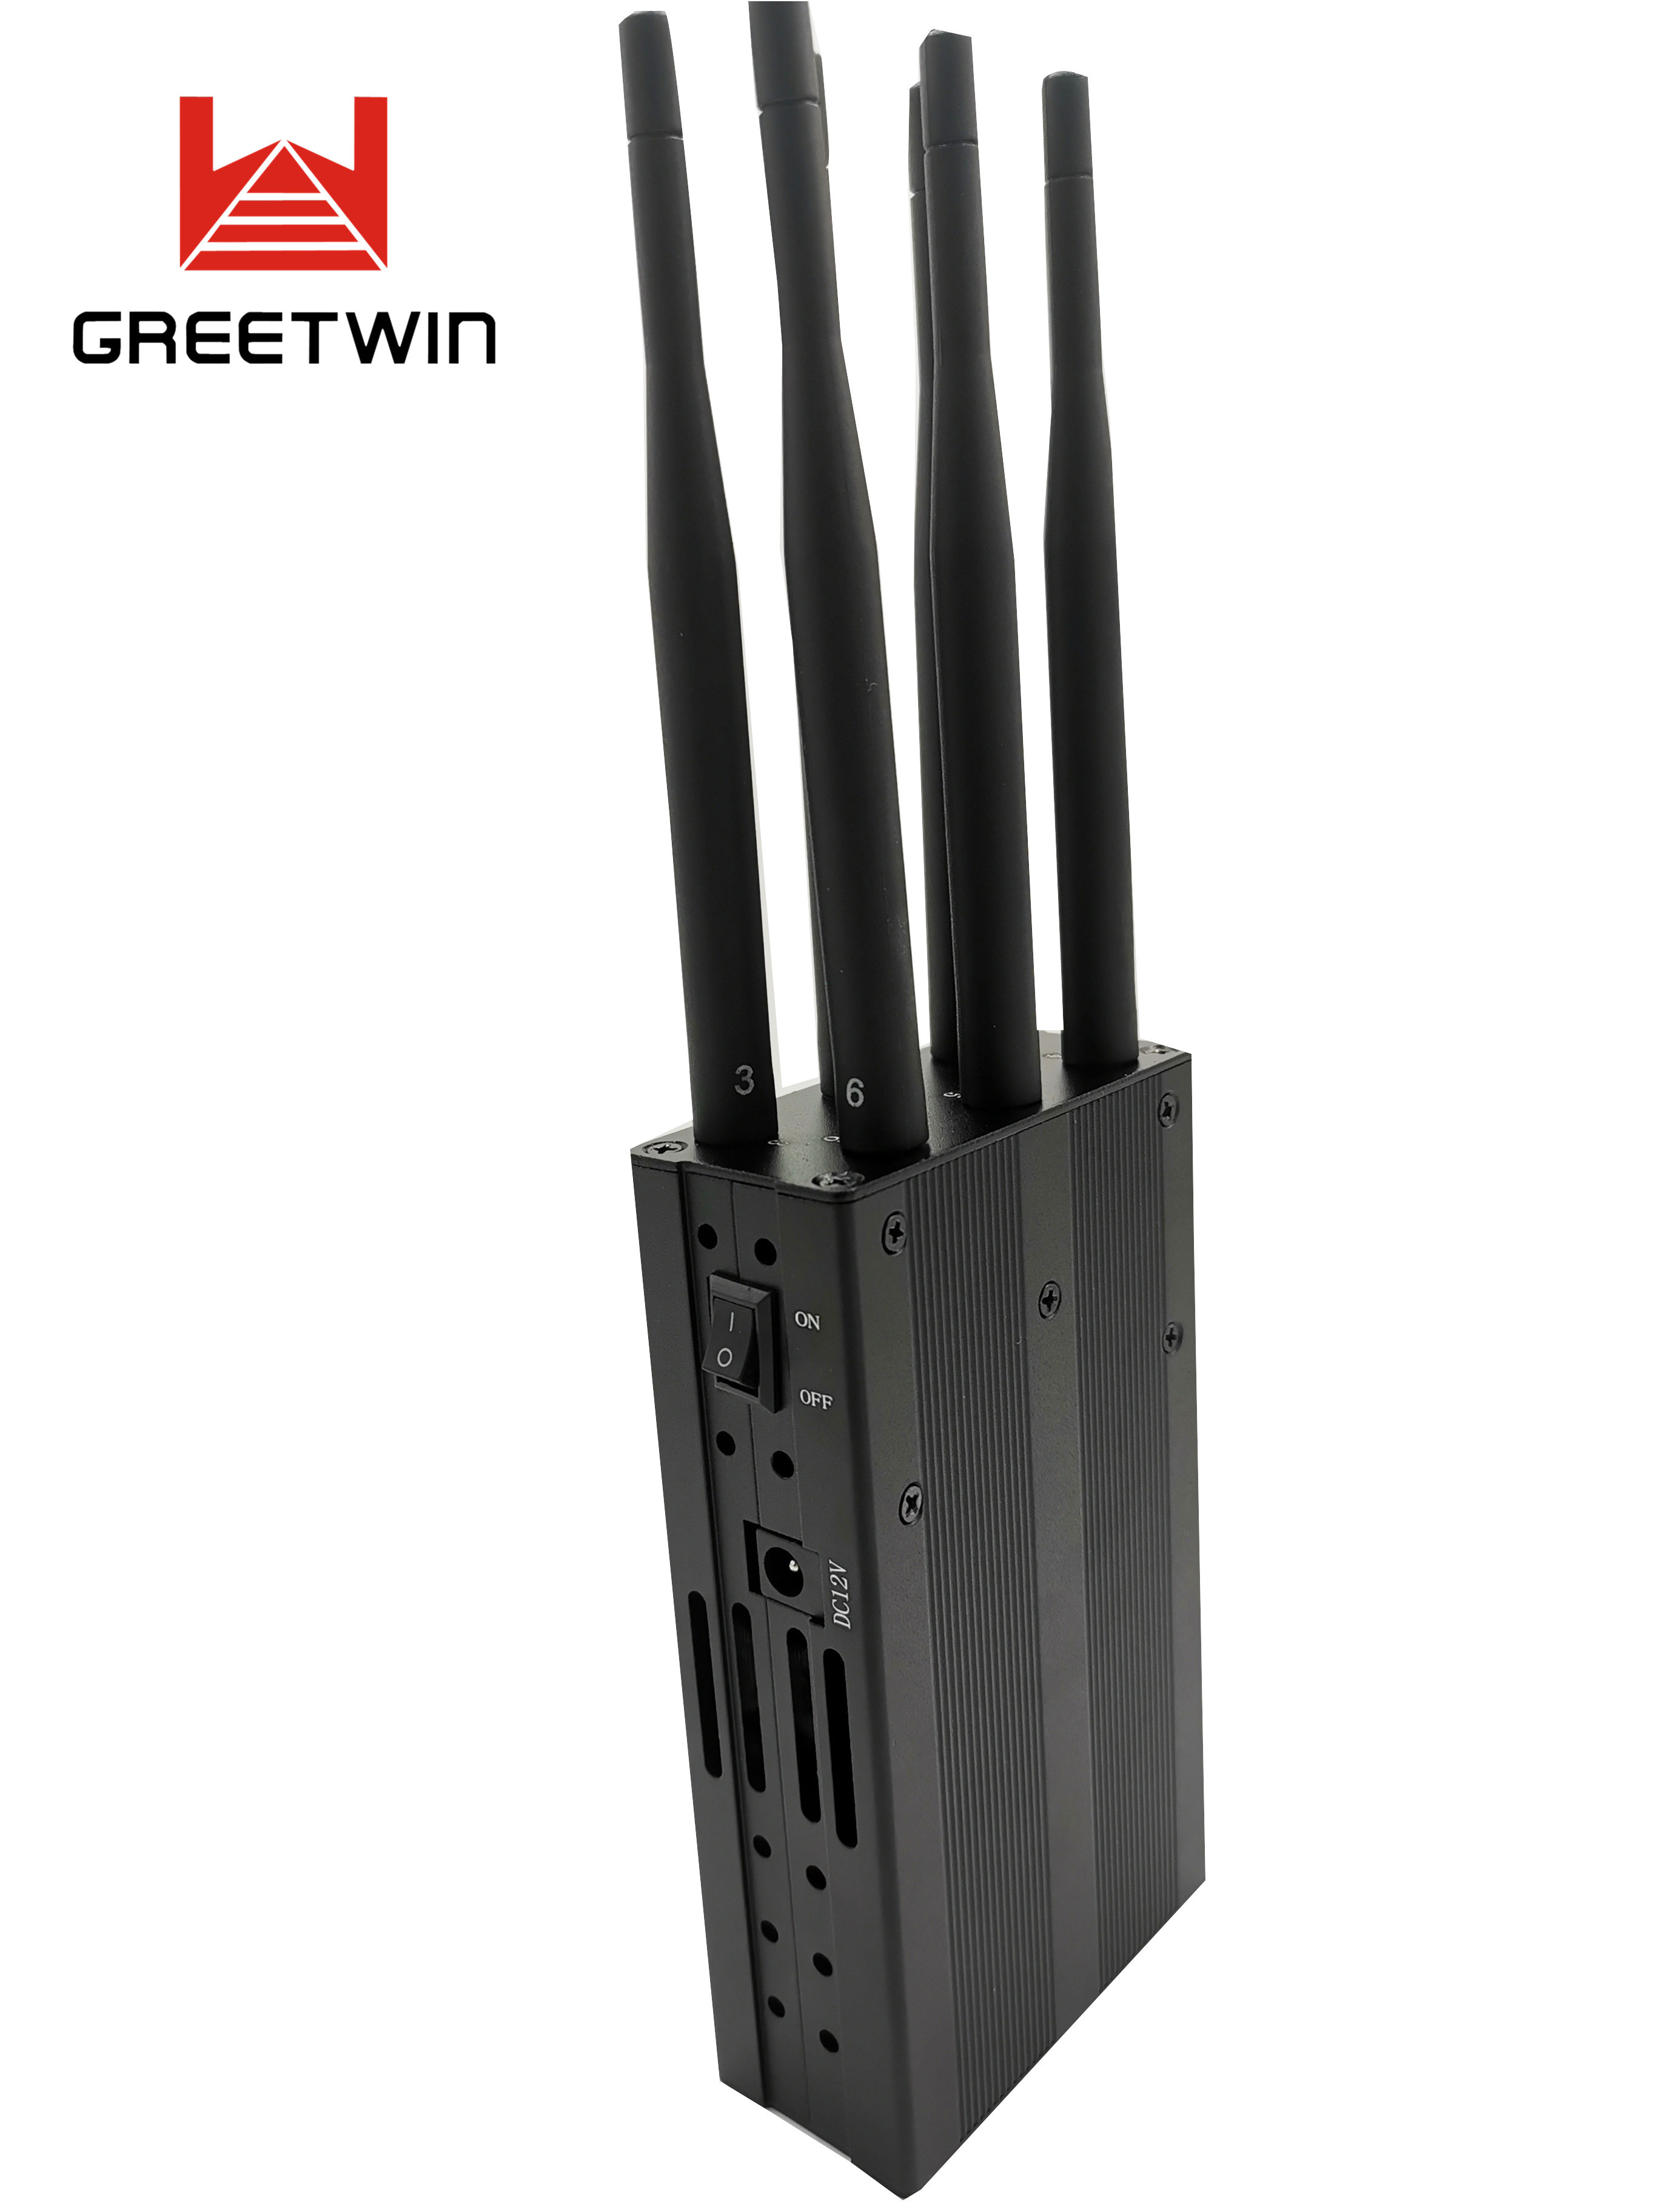 Compact Cell Phone Signal Jammer With 6 Antennas Jam All Europe Frequency Bands